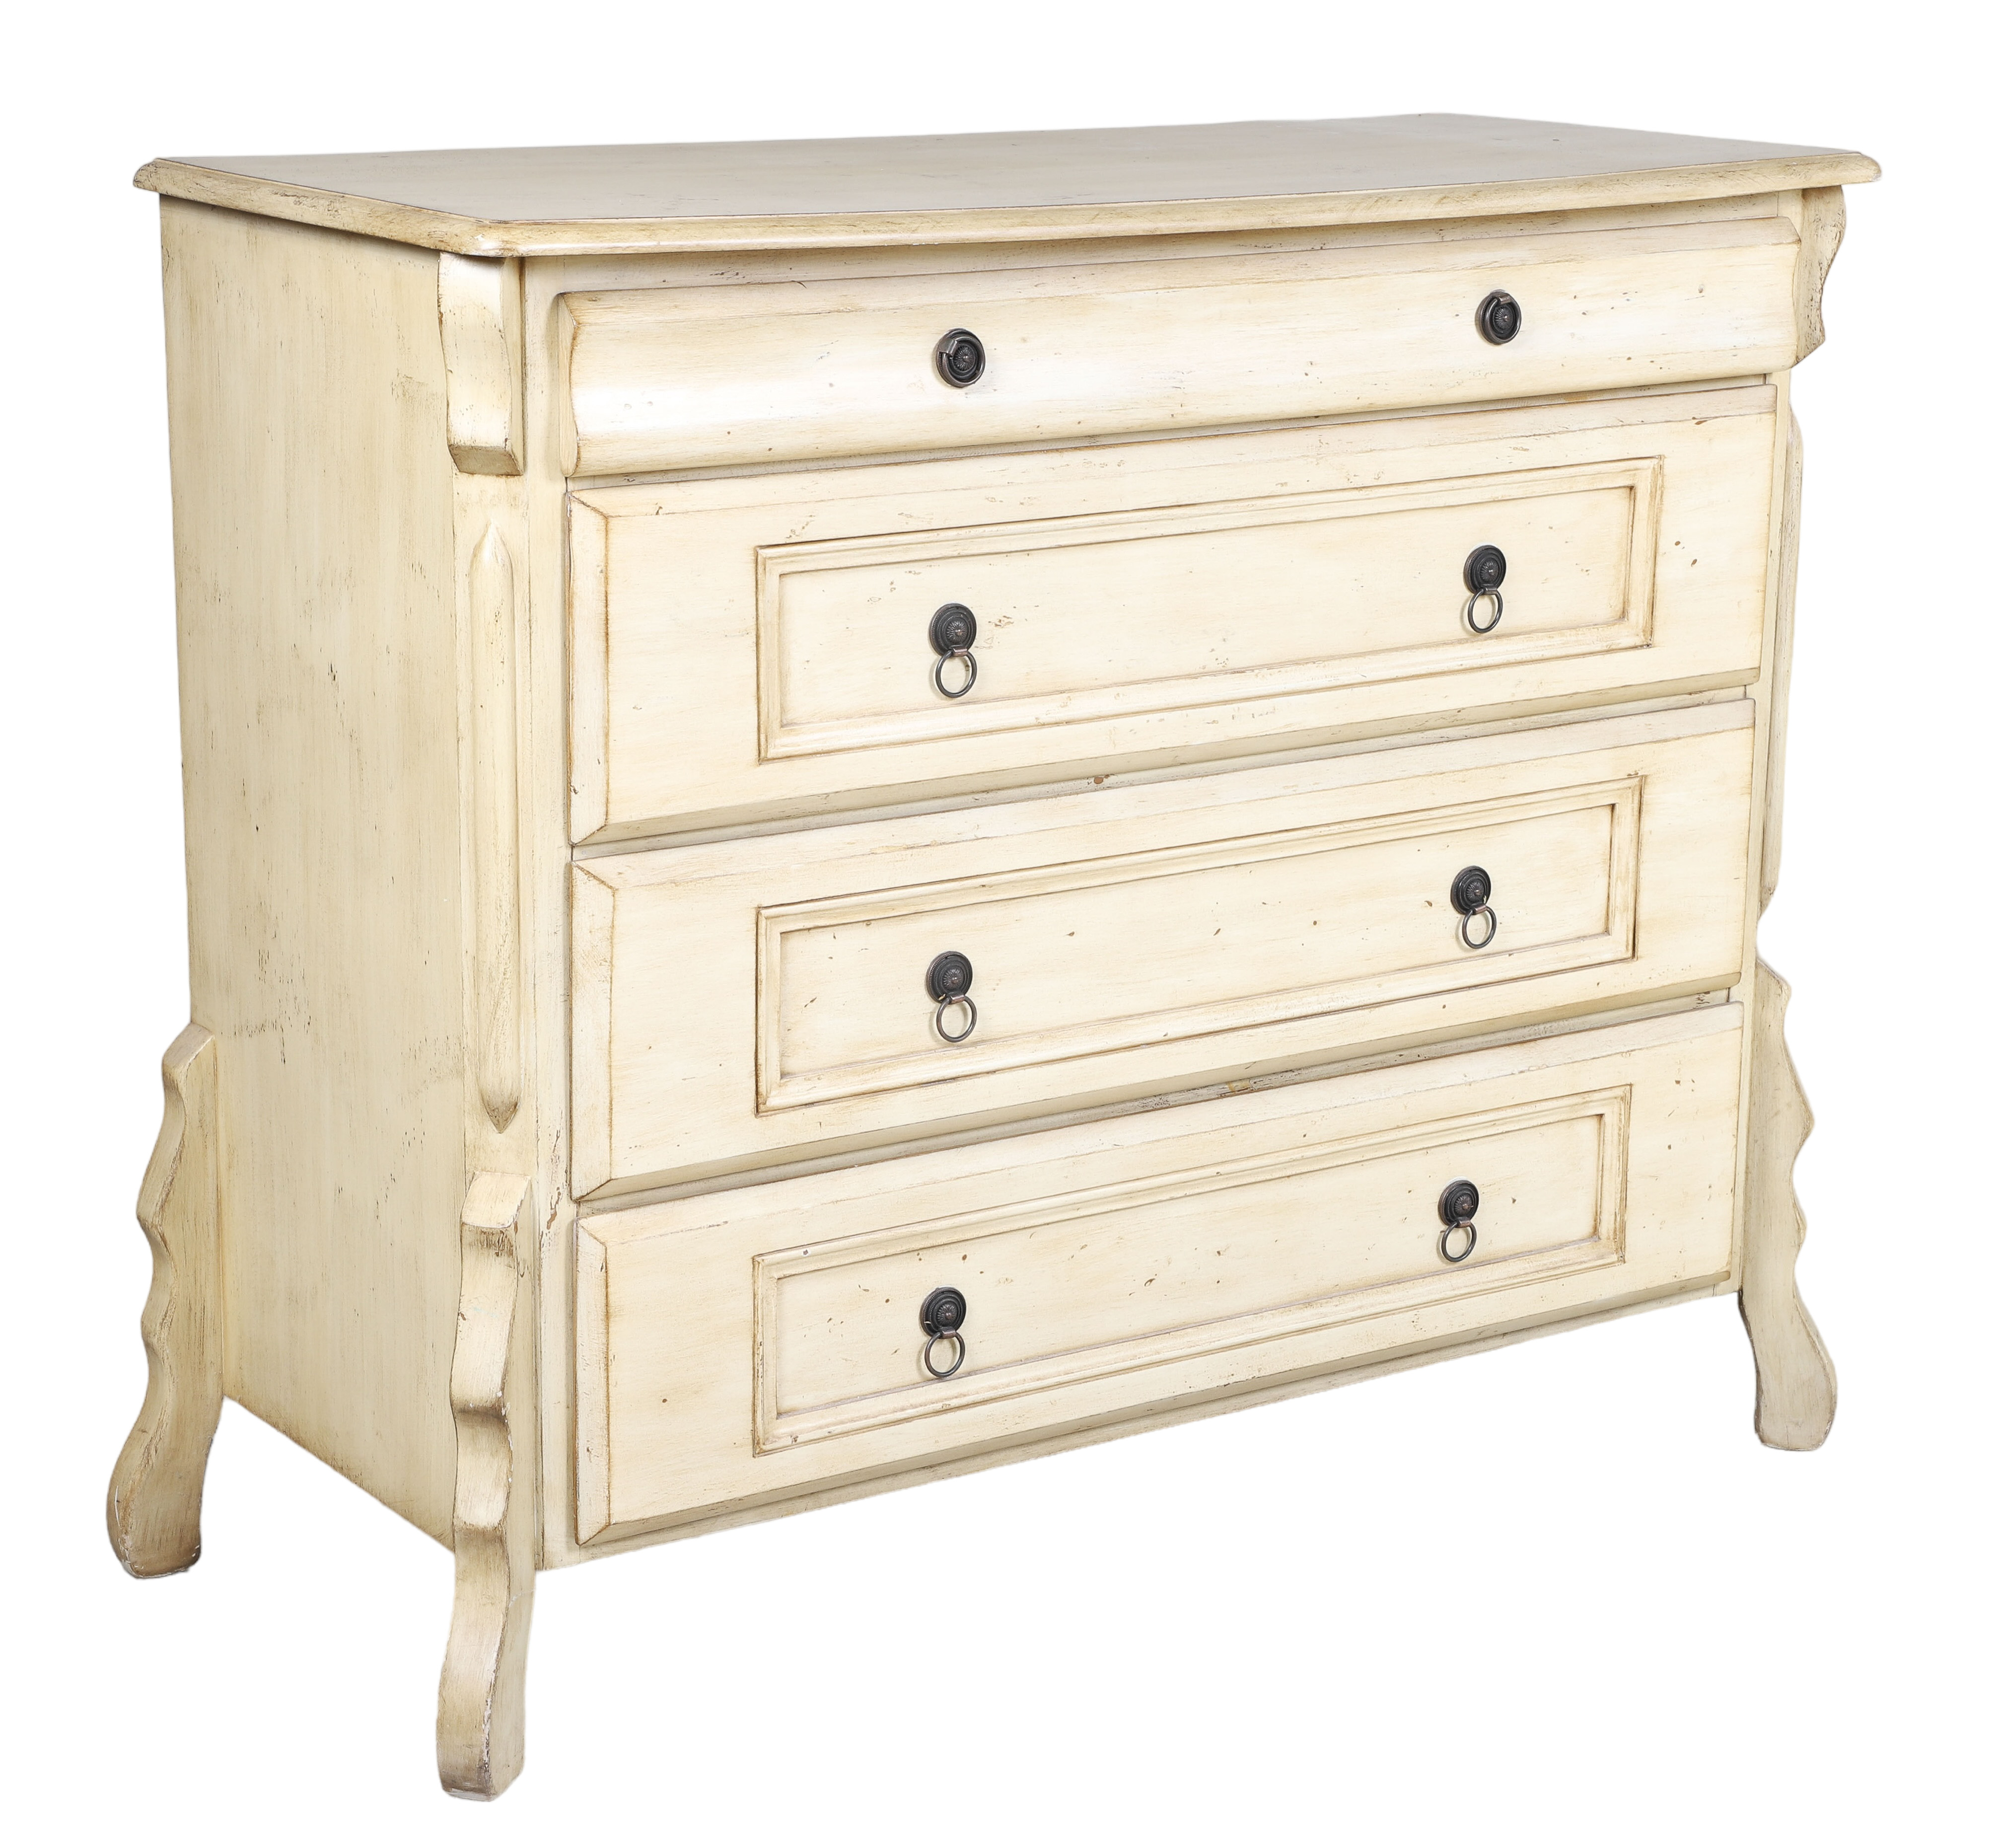 Contemporary paint decorated chest